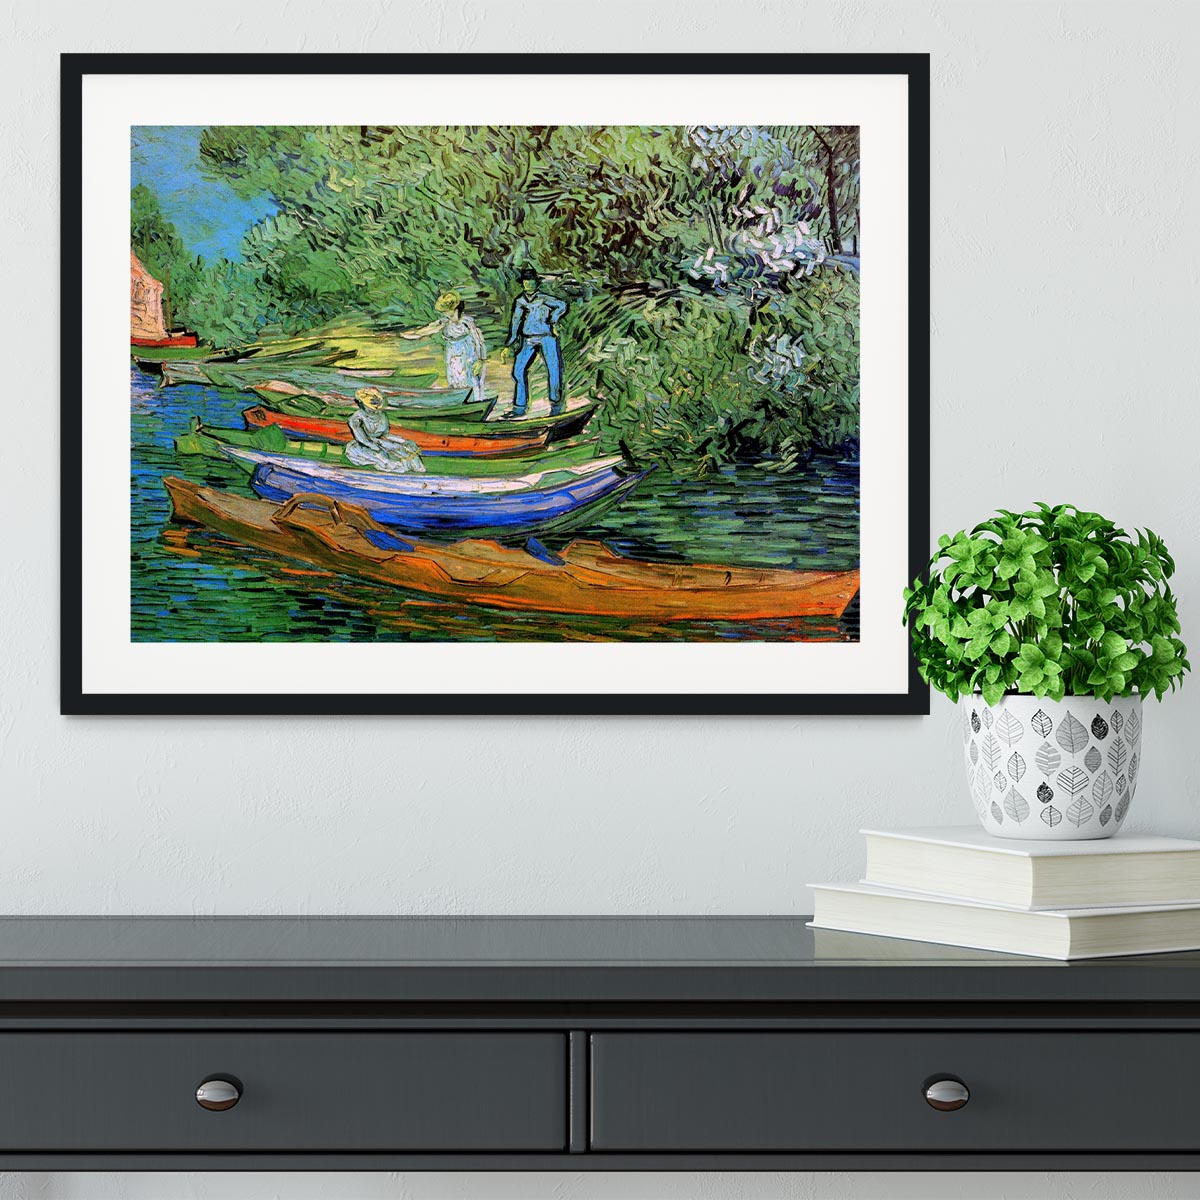 Bank of the Oise at Auvers by Van Gogh Framed Print - Canvas Art Rocks - 1